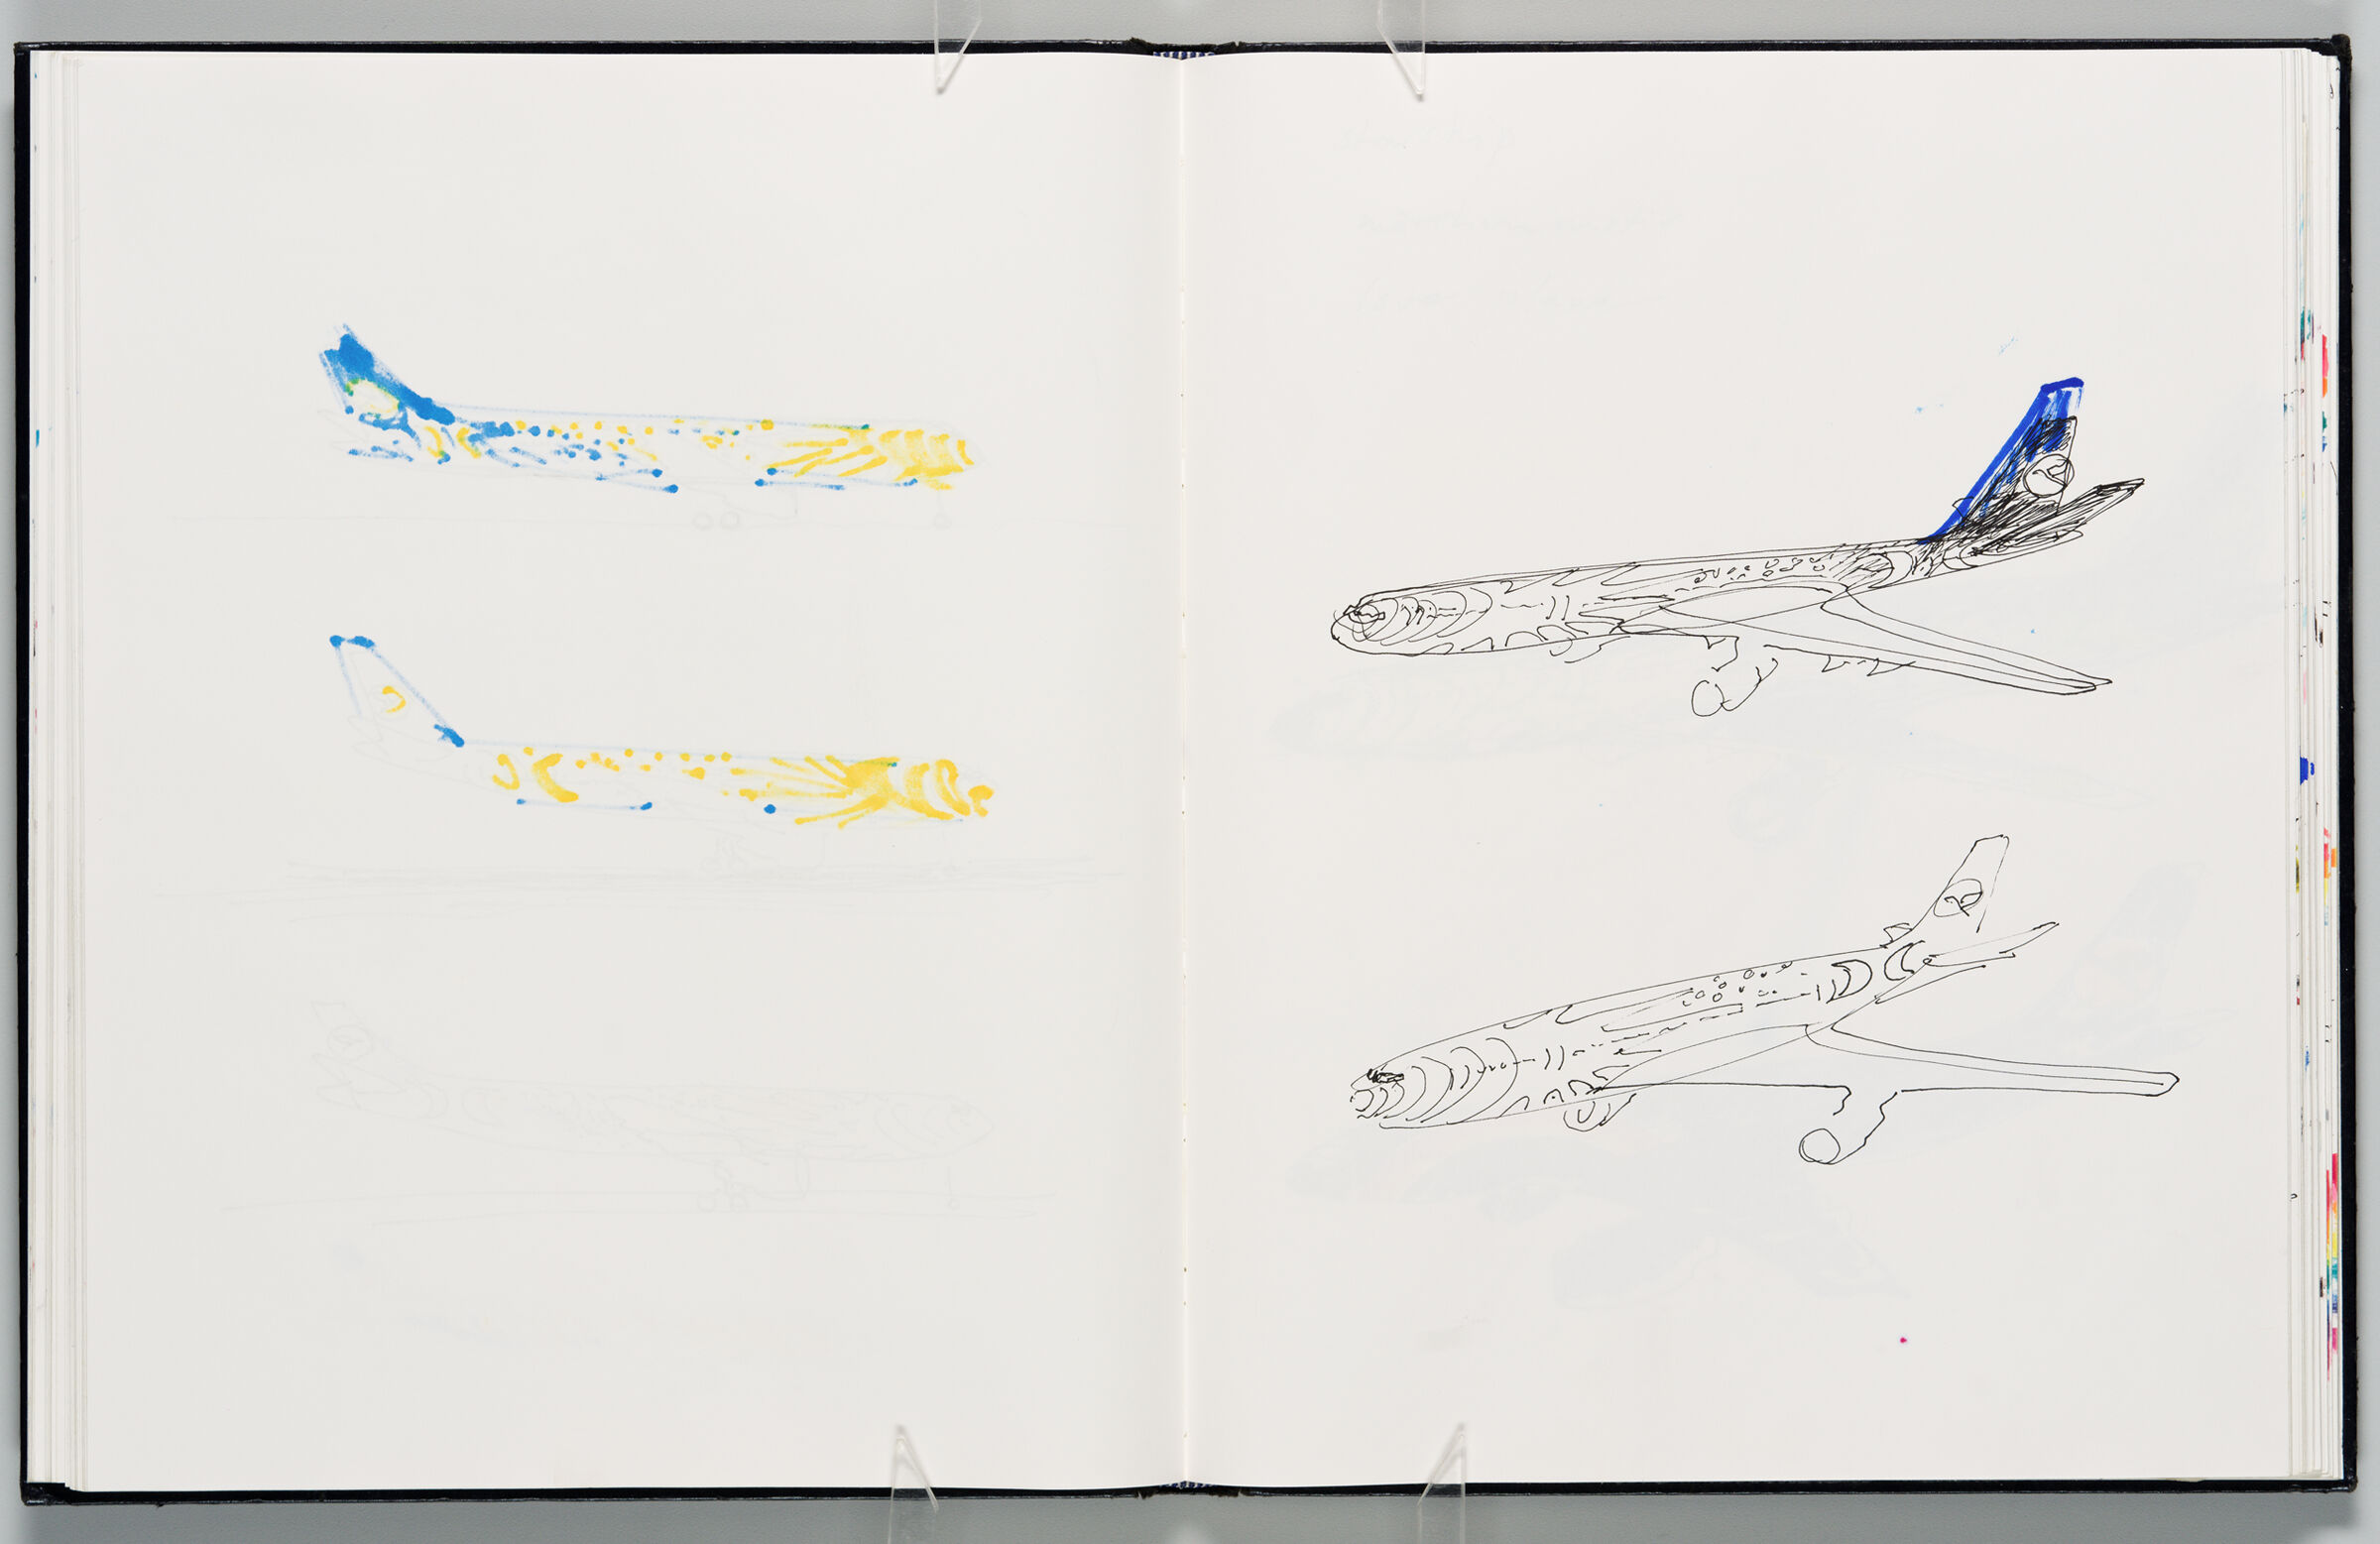 Untitled (Bleed-Through Of Previous Page, Left Page); Untitled (Star- And Sun Plane Designs For Condor, Right Page)